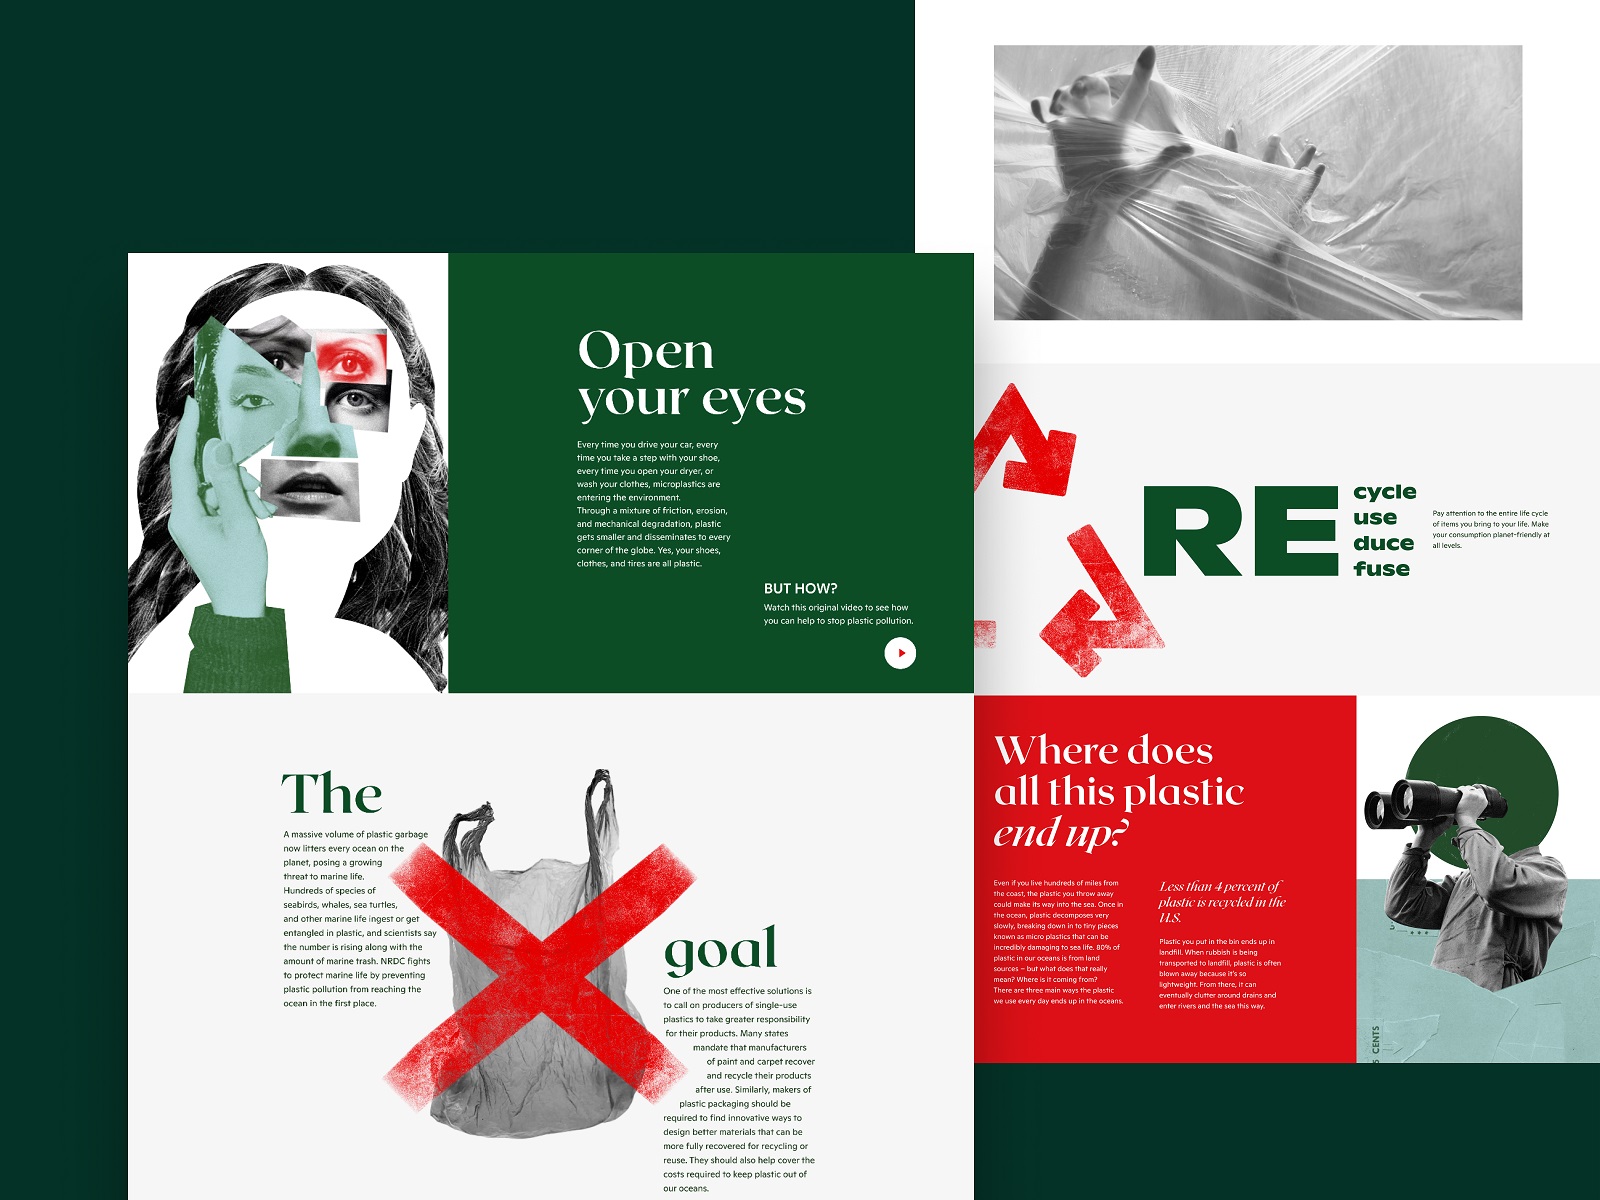 Web Design Examples on Environmental and Ecological Issues